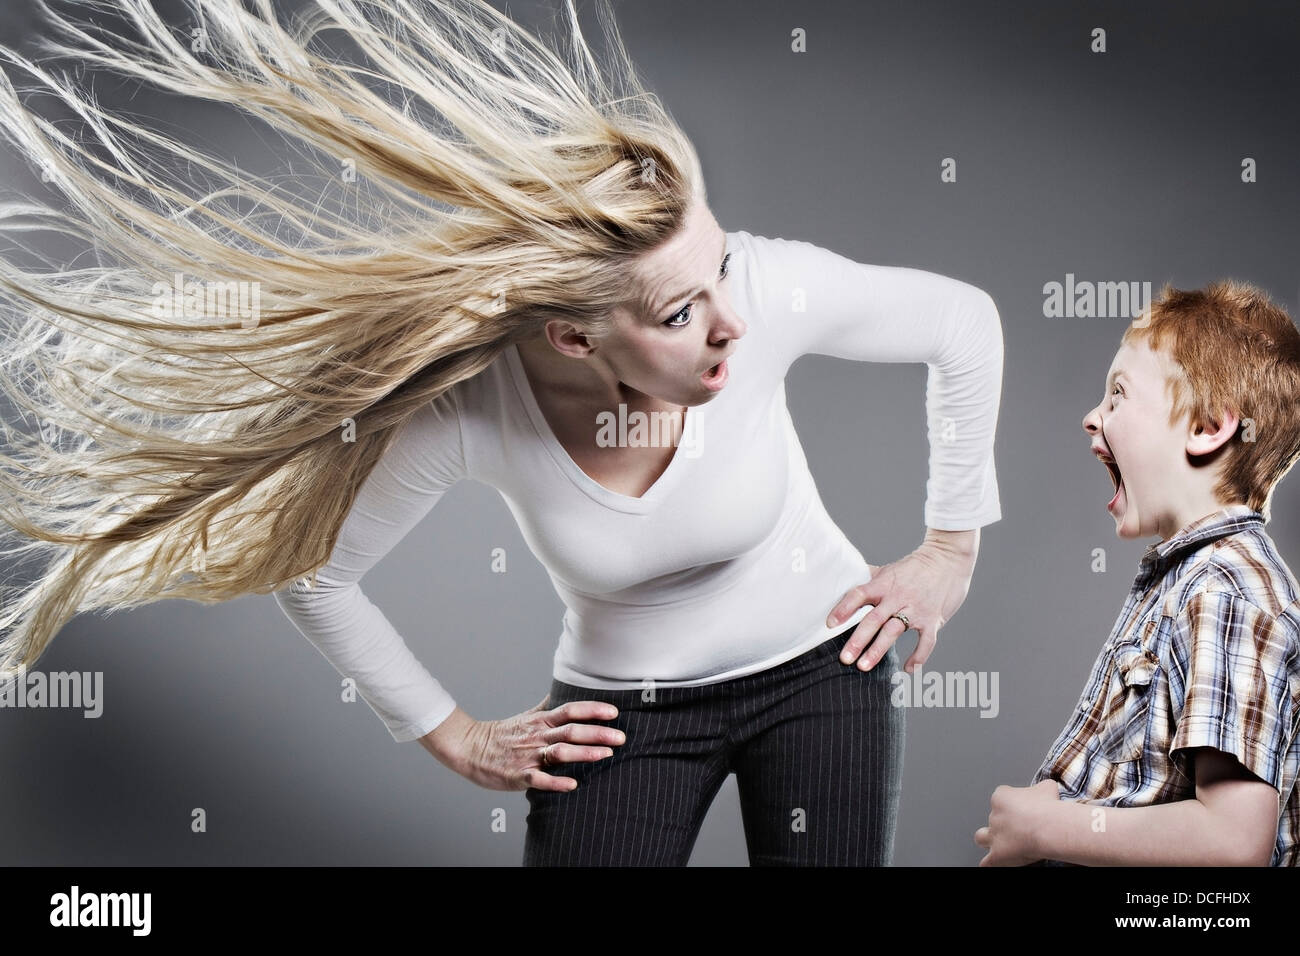 Mother Yelling At Son As Her Hair Blows Wildly Stock Photo